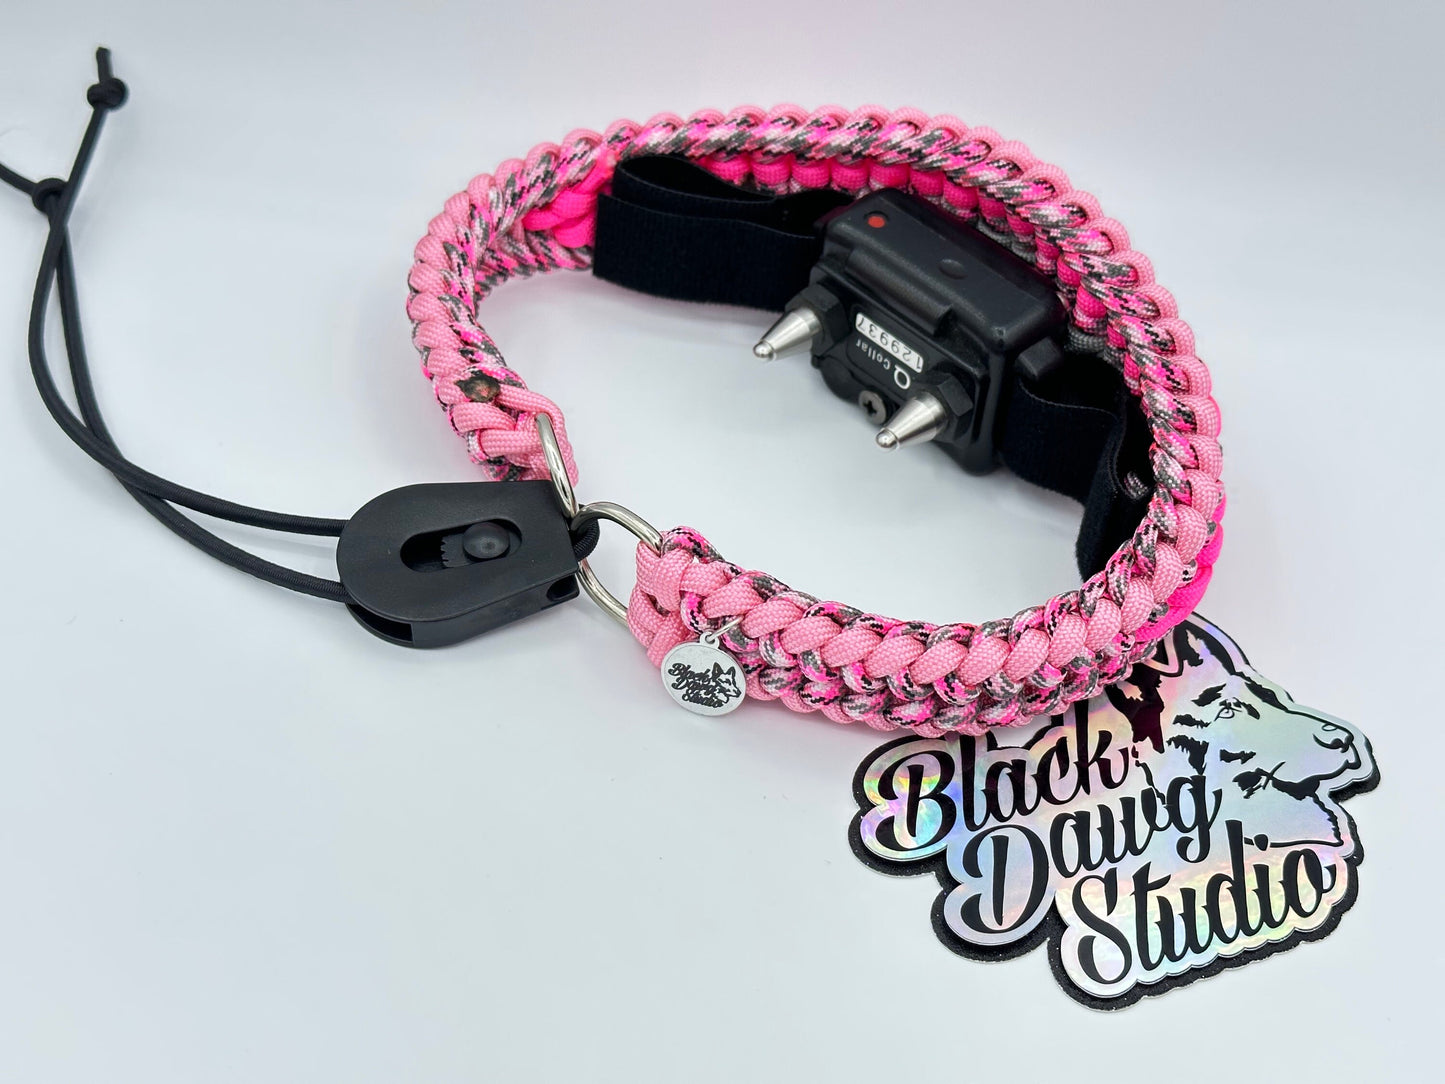 e-Secret Keeper Paracord Collar - Electric/Remote Training Collar Cover - Rose Pink, Pink Camo, Neon Pink, Pink Camo, and Silver